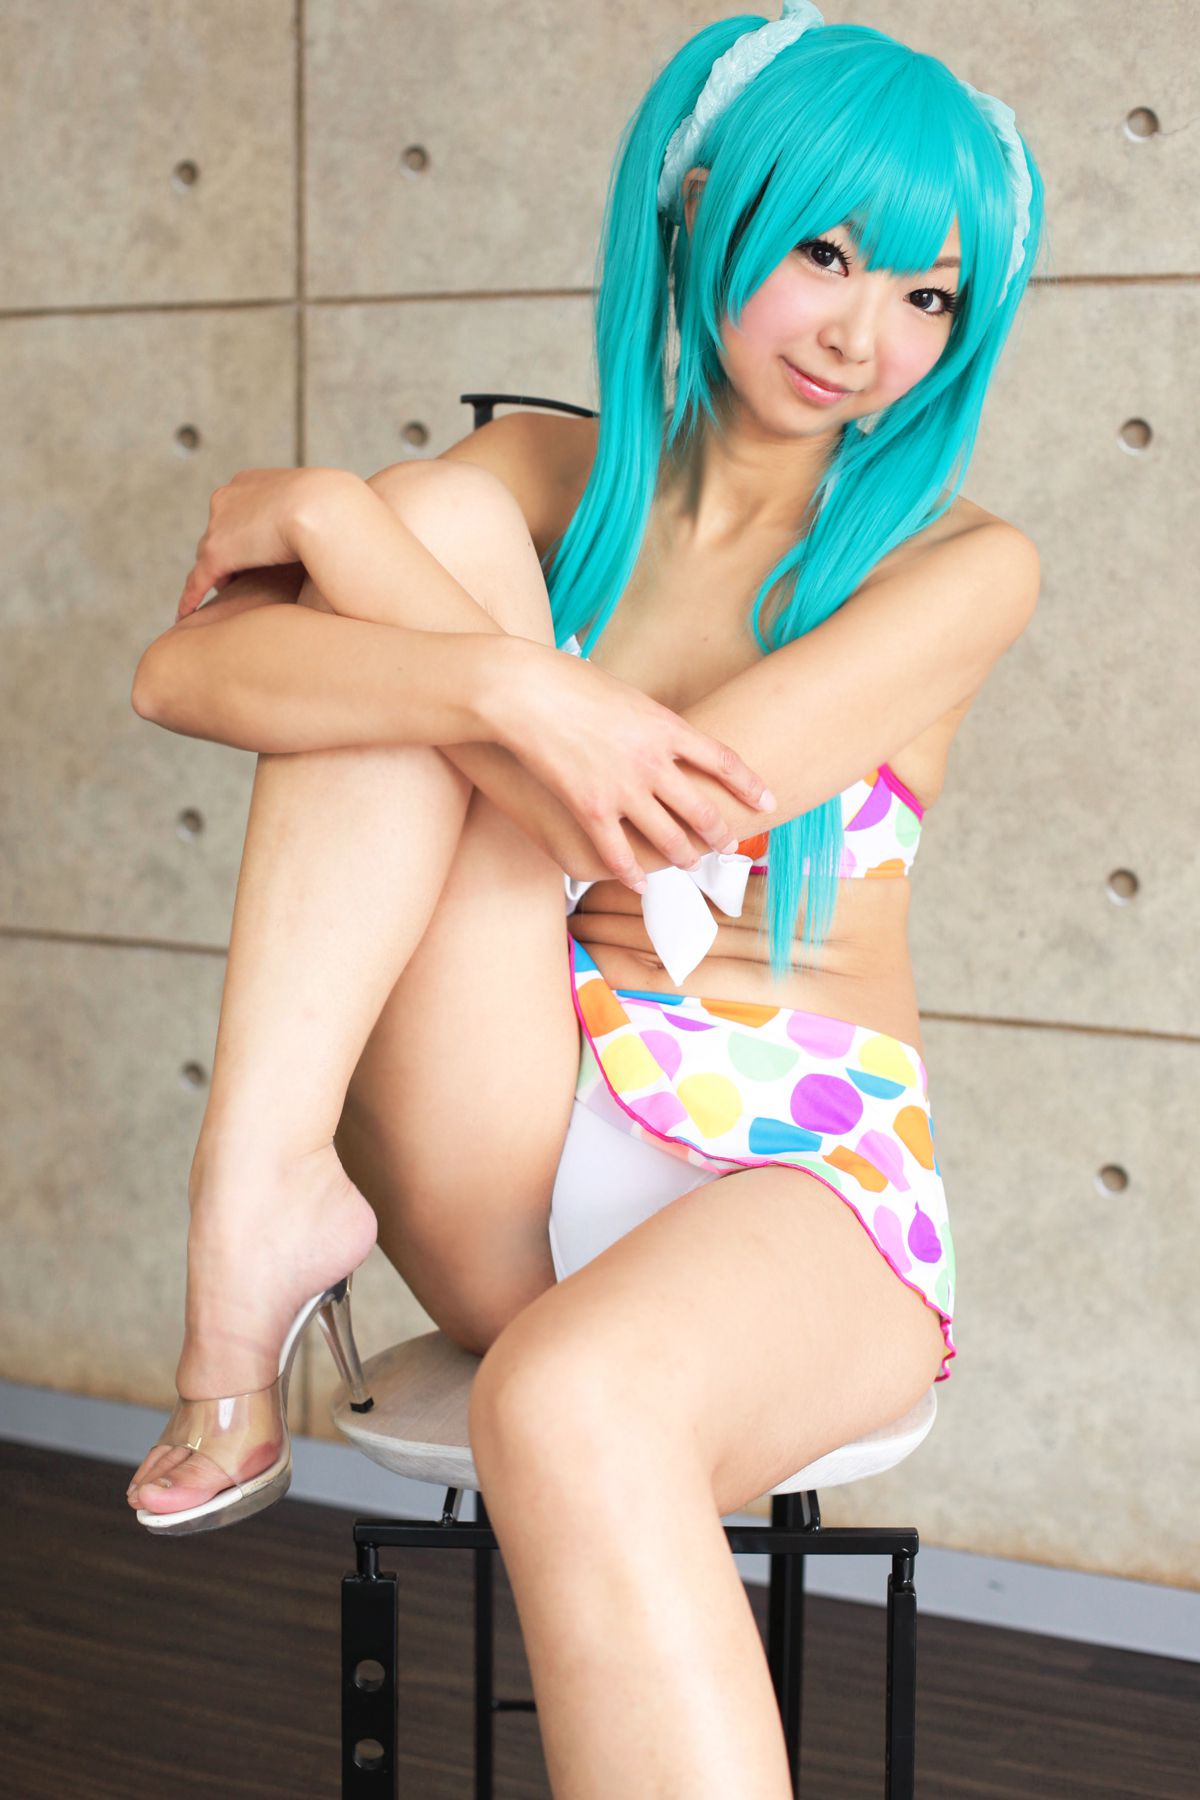 taotuhome[Cosplay] Necoco as Hatsune Miku from Vocaloid 套图第3张